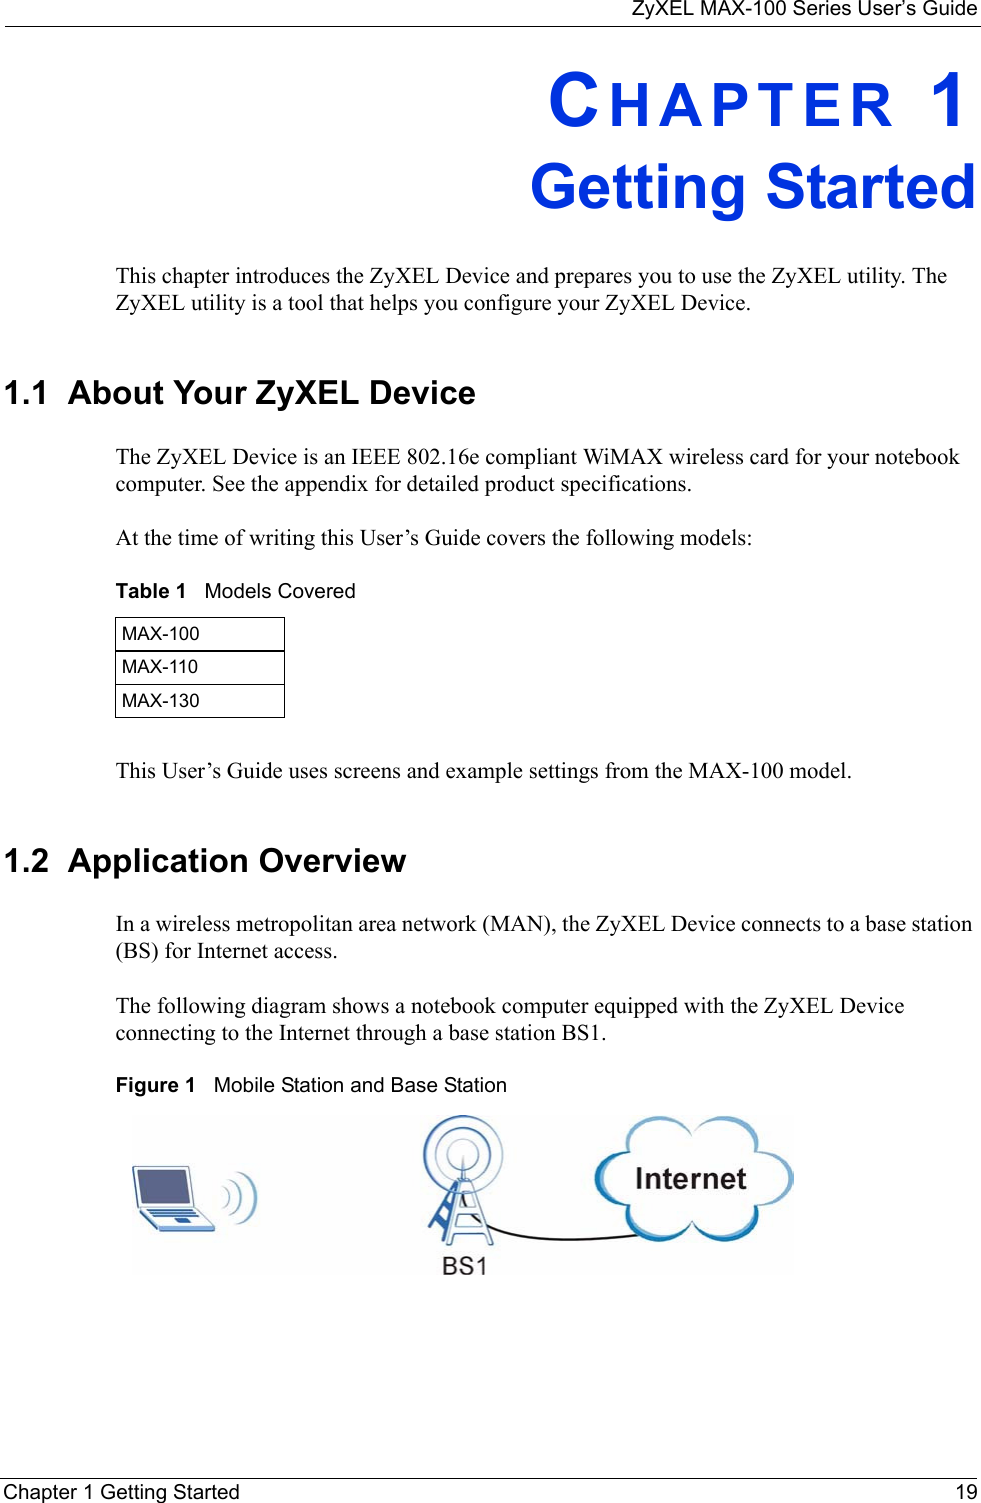 ZyXEL MAX-100 Series User’s GuideChapter 1 Getting Started 19CHAPTER 1Getting StartedThis chapter introduces the ZyXEL Device and prepares you to use the ZyXEL utility. The ZyXEL utility is a tool that helps you configure your ZyXEL Device.1.1  About Your ZyXEL Device    The ZyXEL Device is an IEEE 802.16e compliant WiMAX wireless card for your notebook computer. See the appendix for detailed product specifications.At the time of writing this User’s Guide covers the following models:This User’s Guide uses screens and example settings from the MAX-100 model.1.2  Application OverviewIn a wireless metropolitan area network (MAN), the ZyXEL Device connects to a base station (BS) for Internet access. The following diagram shows a notebook computer equipped with the ZyXEL Device connecting to the Internet through a base station BS1.Figure 1   Mobile Station and Base StationTable 1   Models CoveredMAX-100MAX-110MAX-130